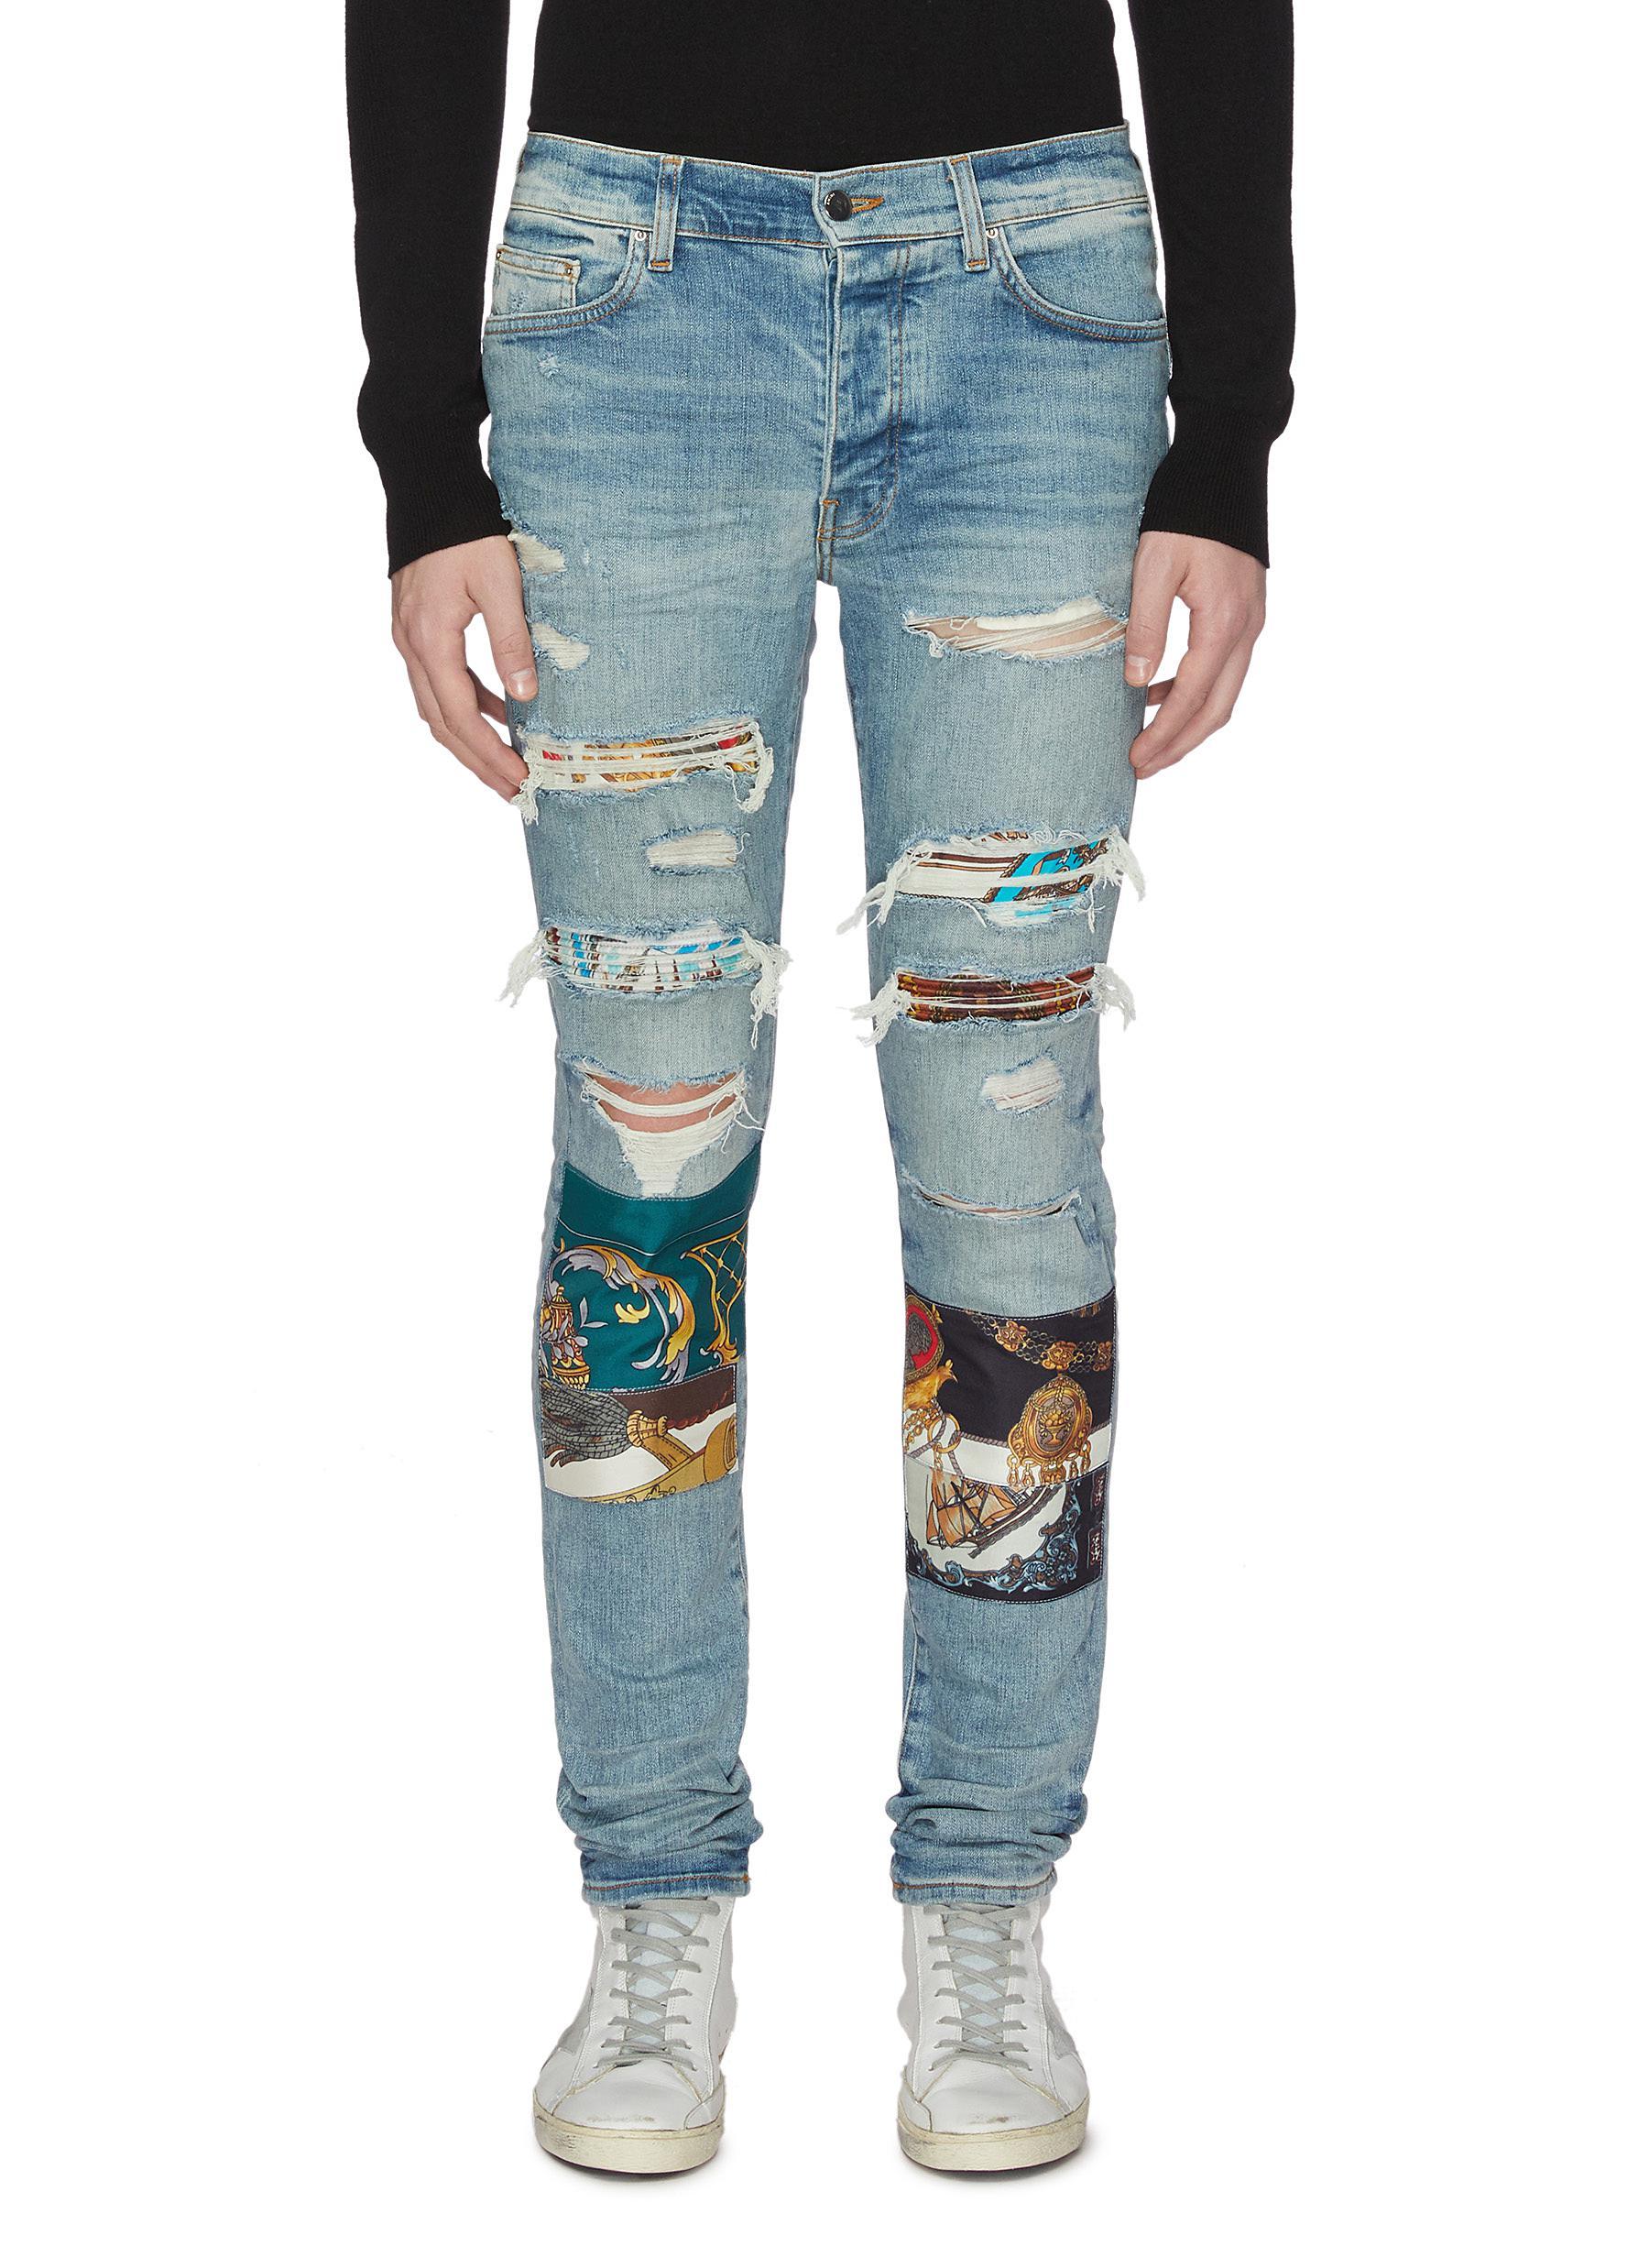 Amiri Denim Scarves Art Patch Ripped Jeans in Blue for Men - Lyst